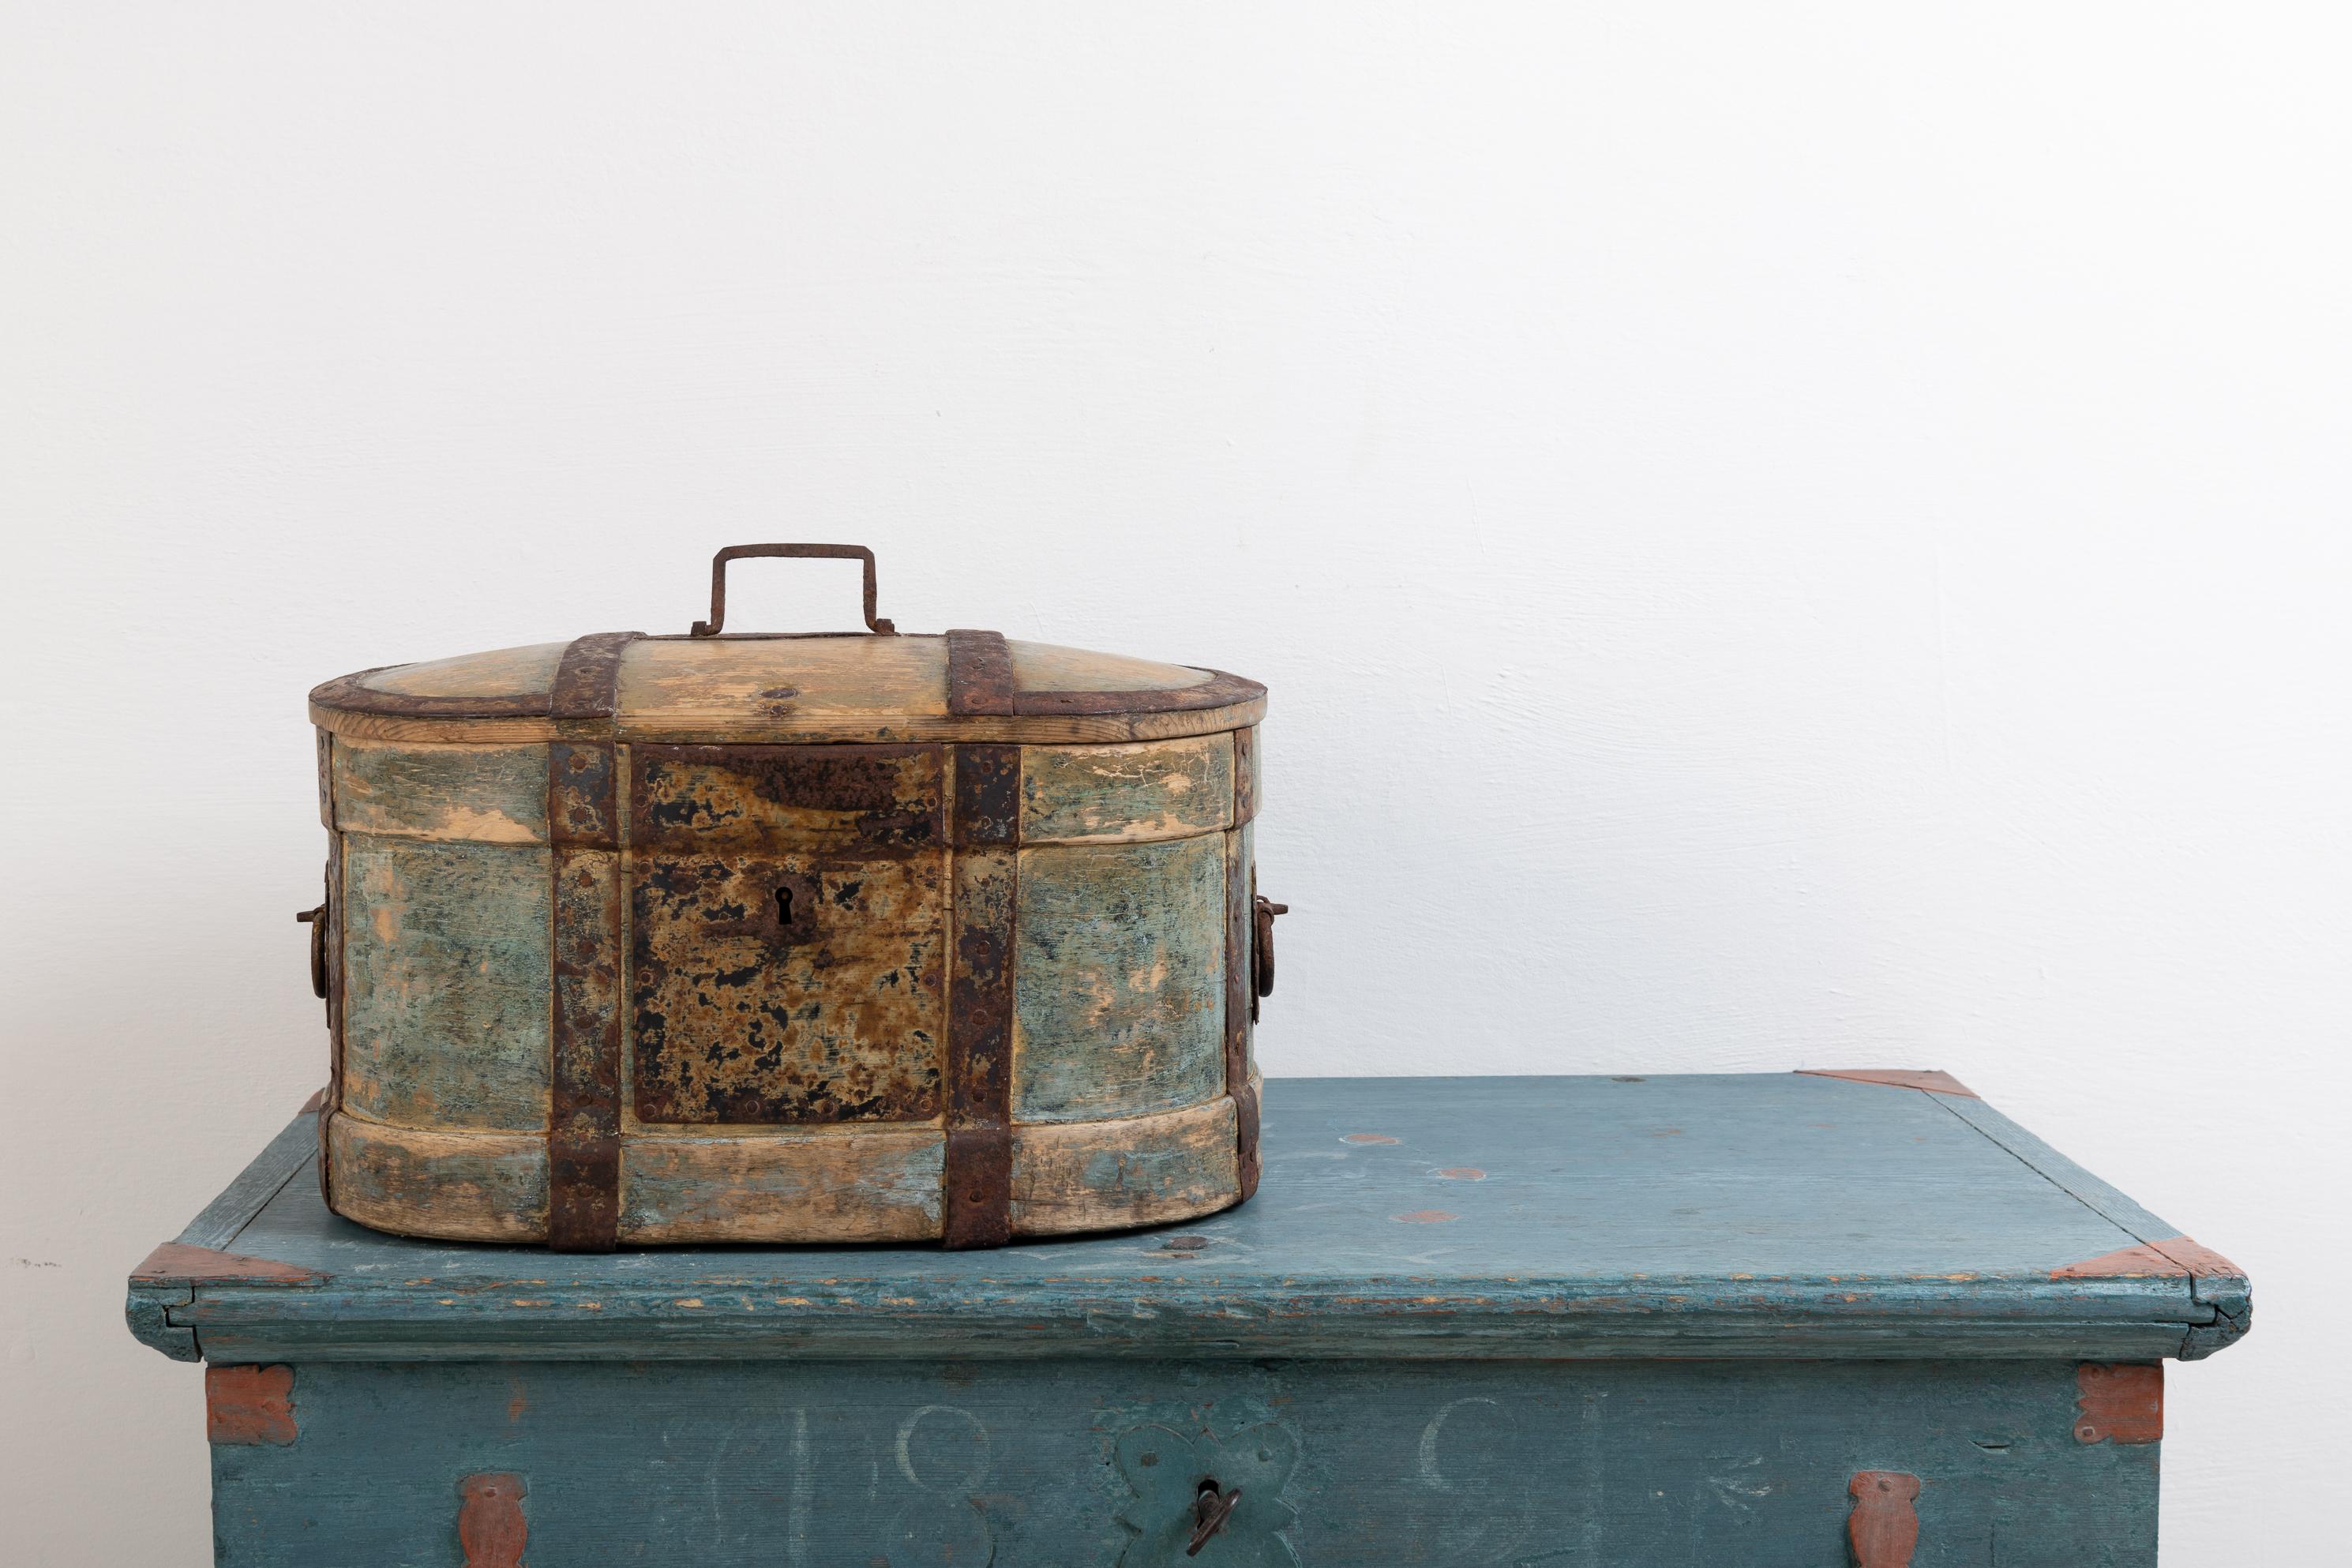 Mid-19th century Folk Art travel box. The box has a painted date and monogram on the inside of the lid. Dated 1864. Decorated and strengthened with handwrought iron around the box and over the lid. The box was used to store valuables during travels.